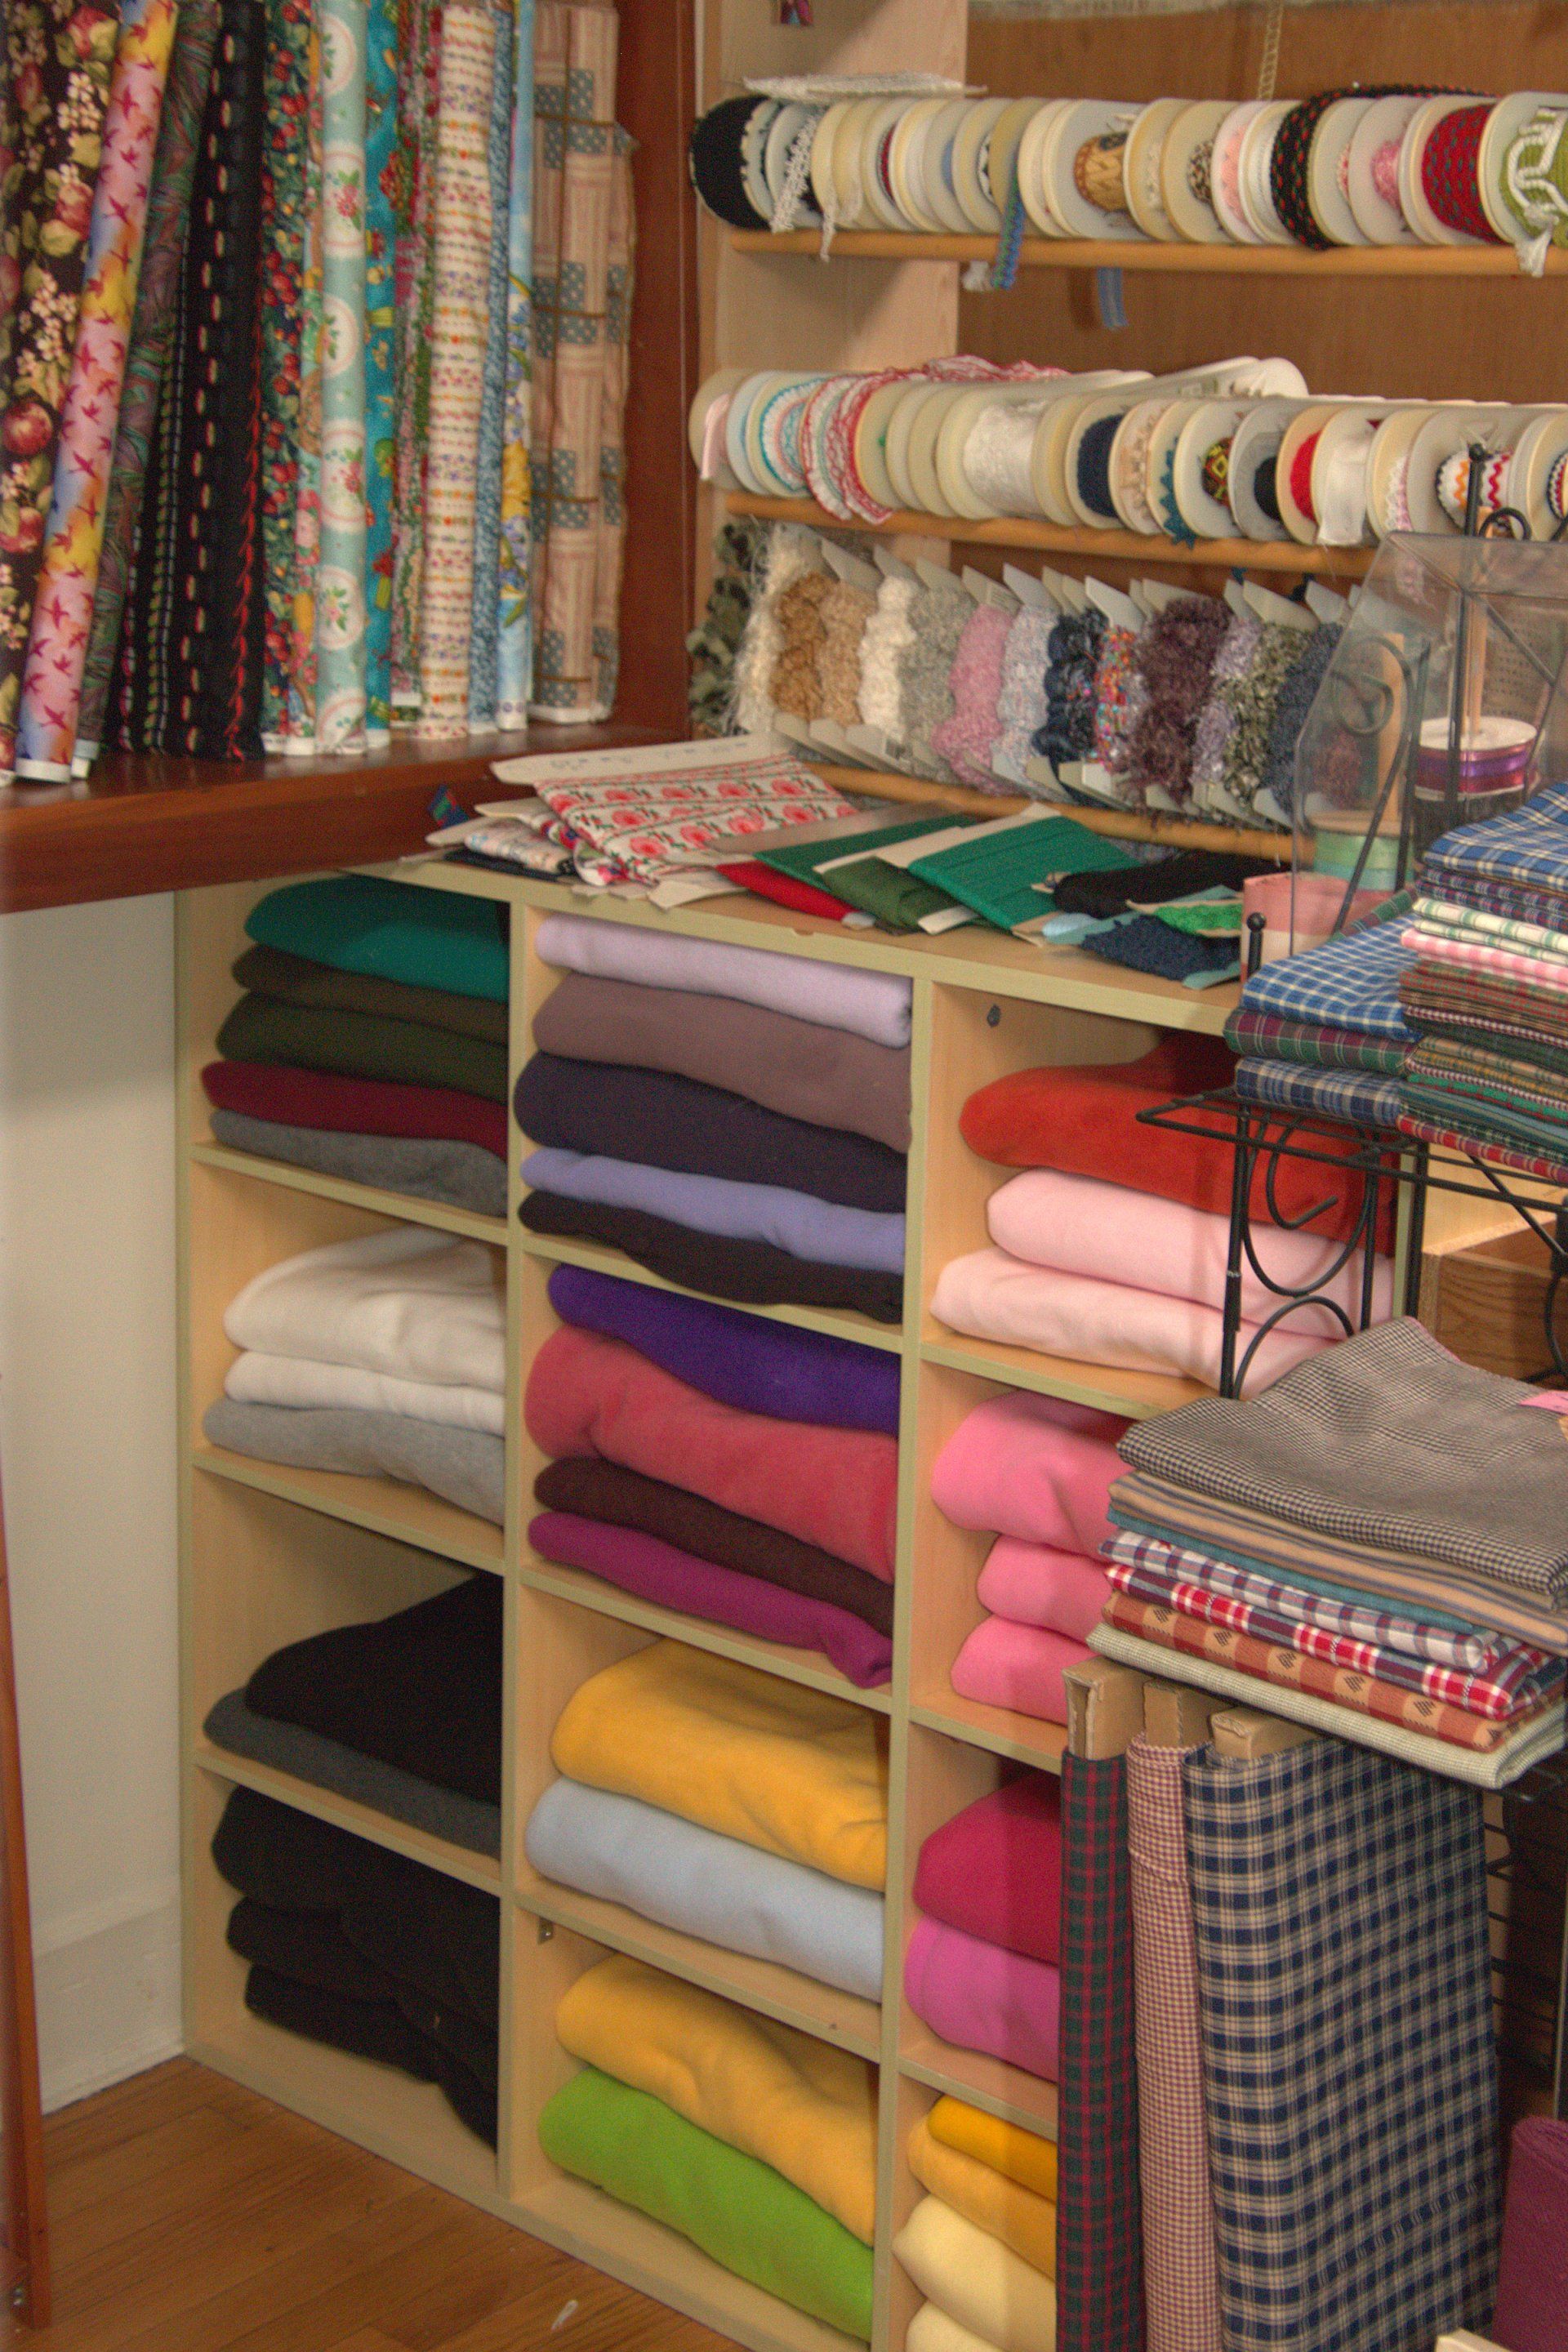 Fabric Consignment Services in Westport, MA